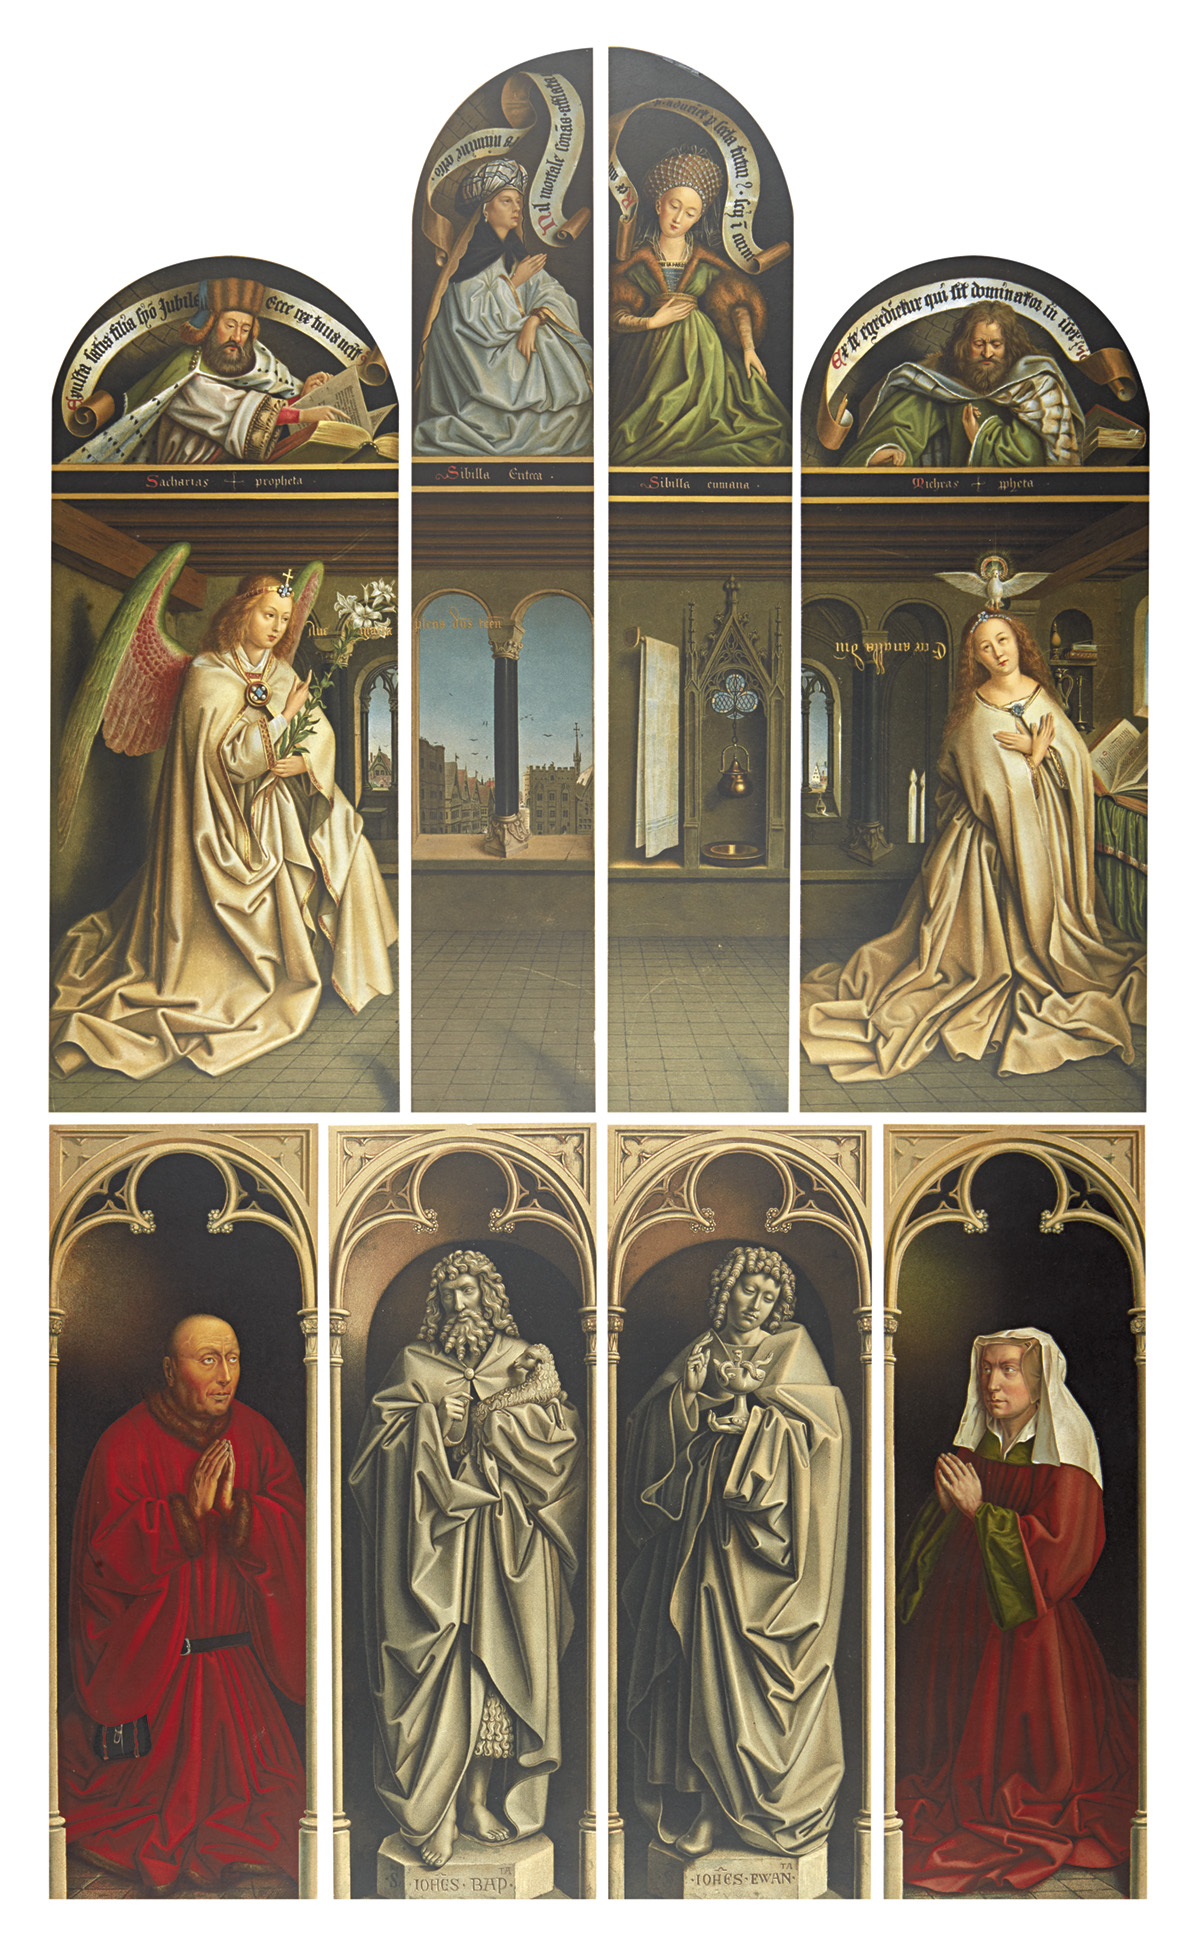 ARUNDEL SOCIETY. Large collection of approximately 185 chromolithographed European Renaissance master paintings.